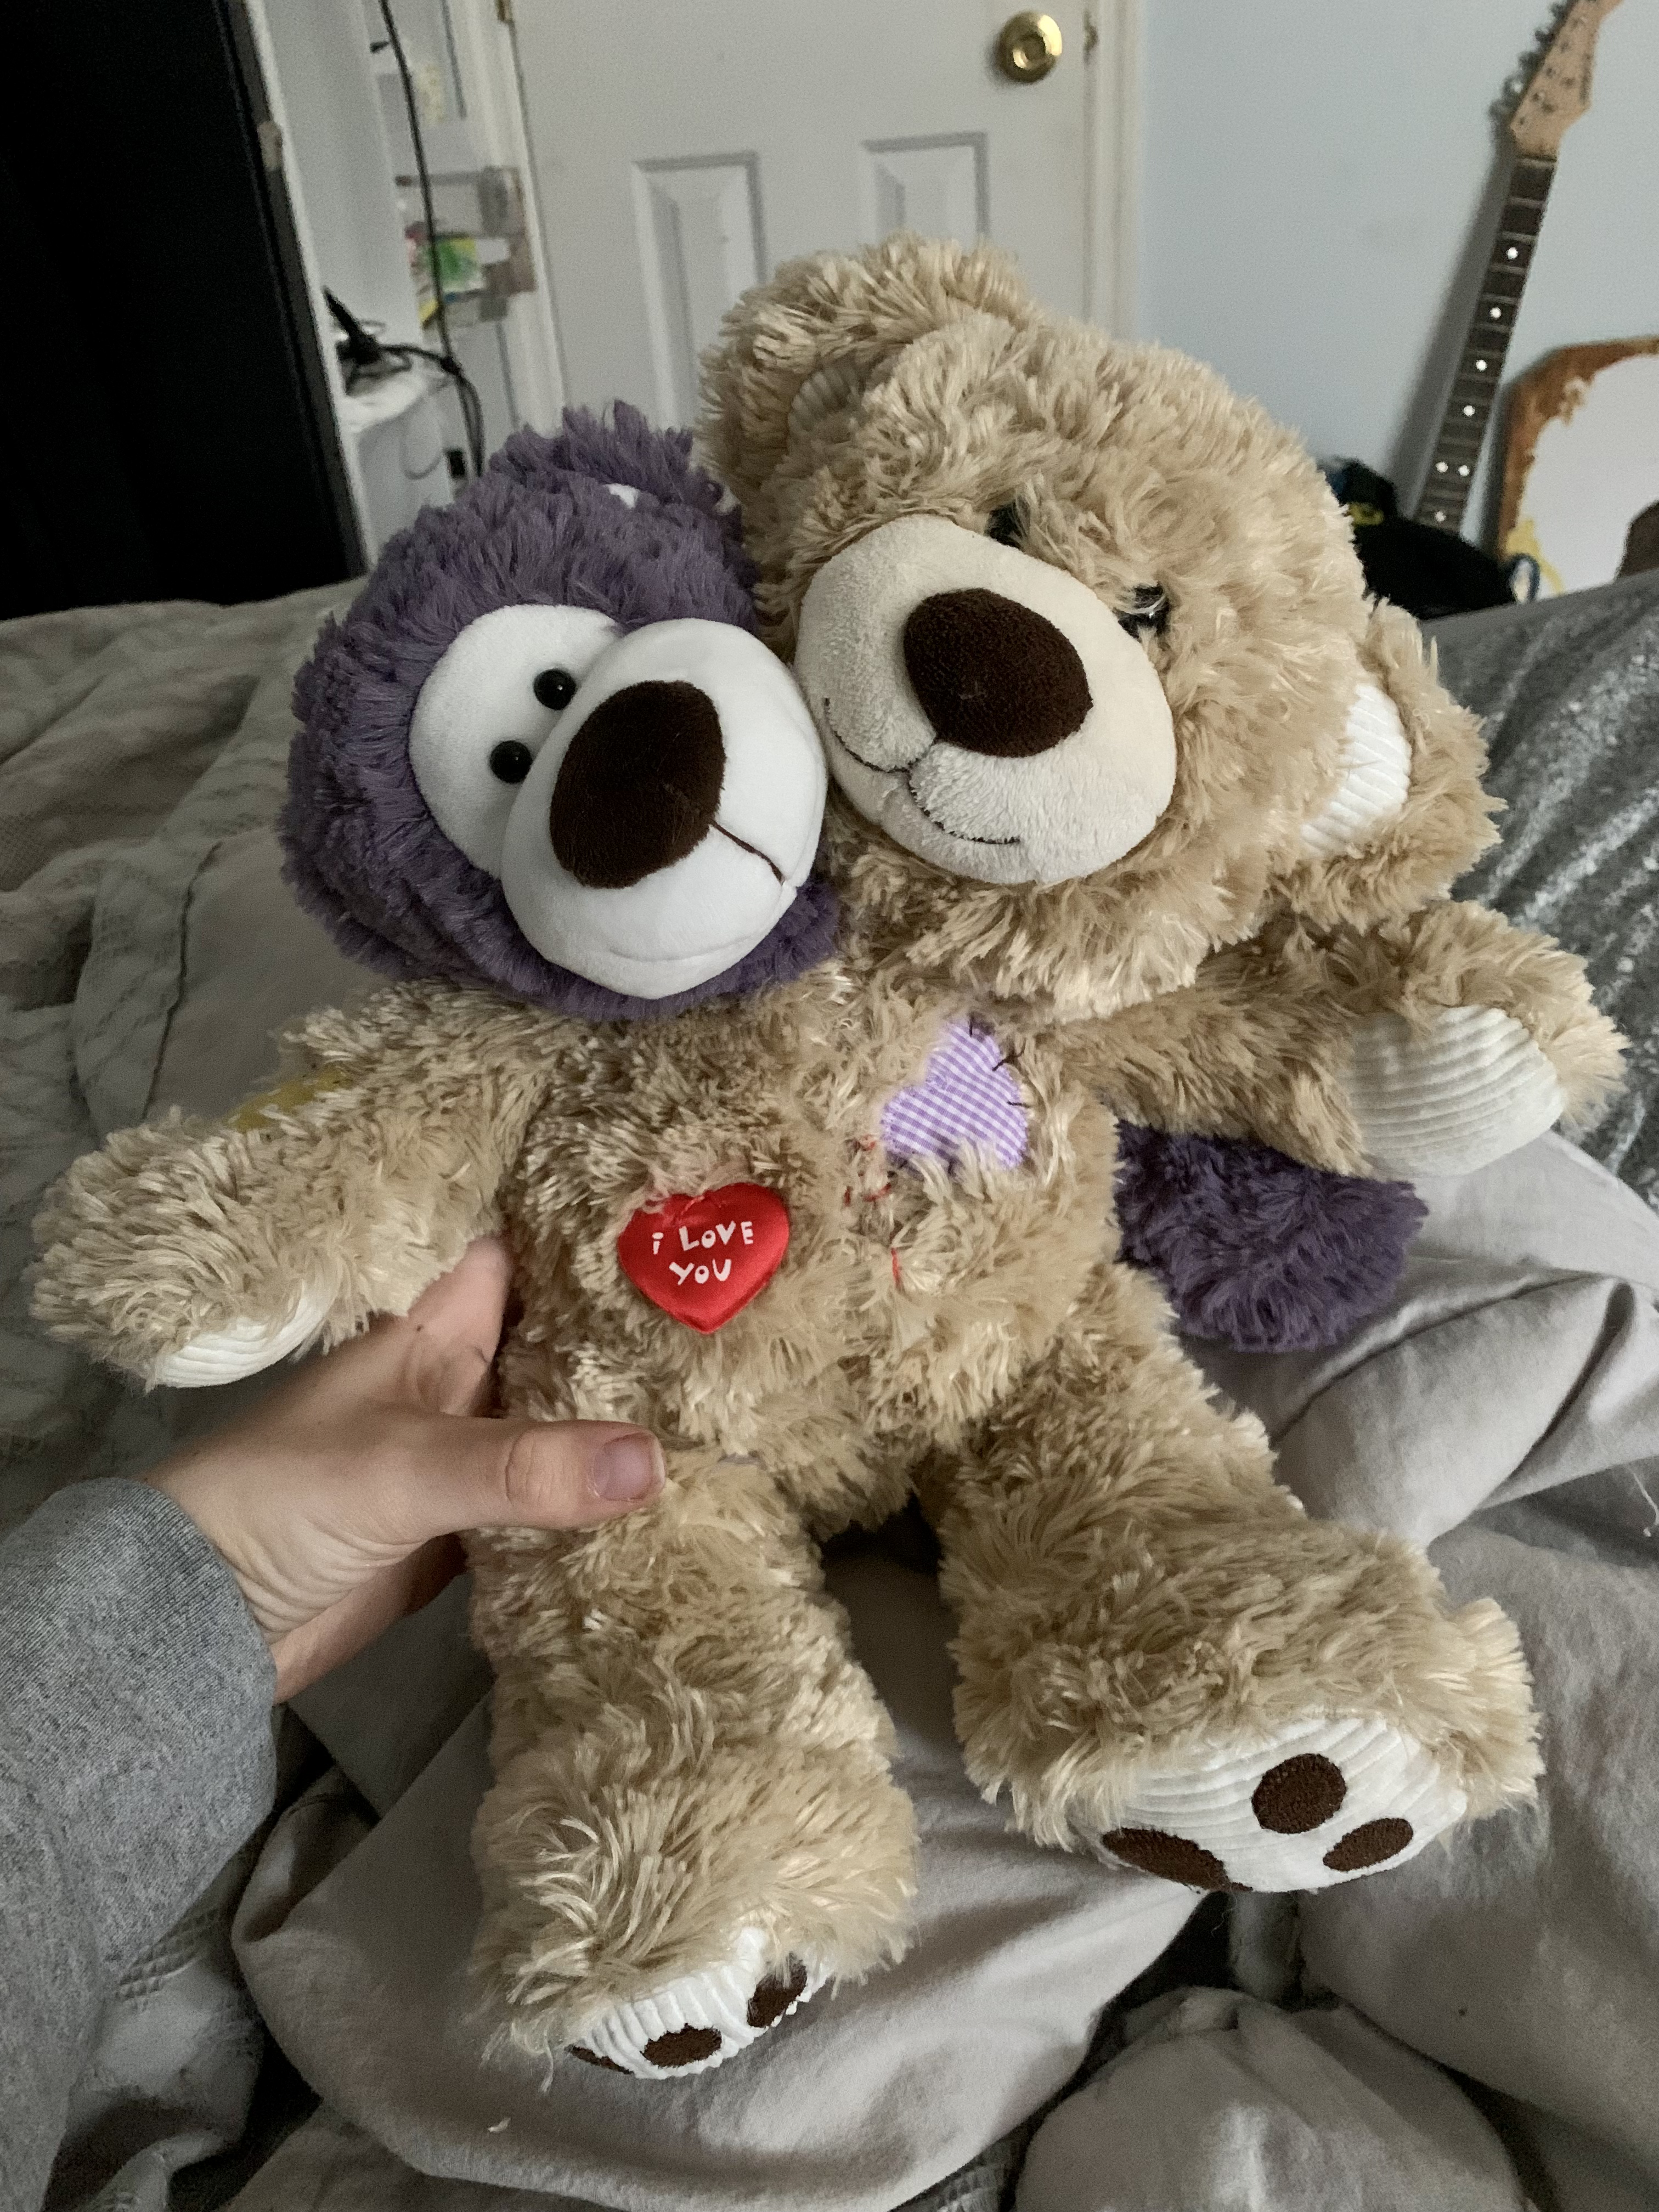 tan and purlpe teddy bear stitched together to make one bear. It has 2 heads and 3 arms, and it's name is Bungy.